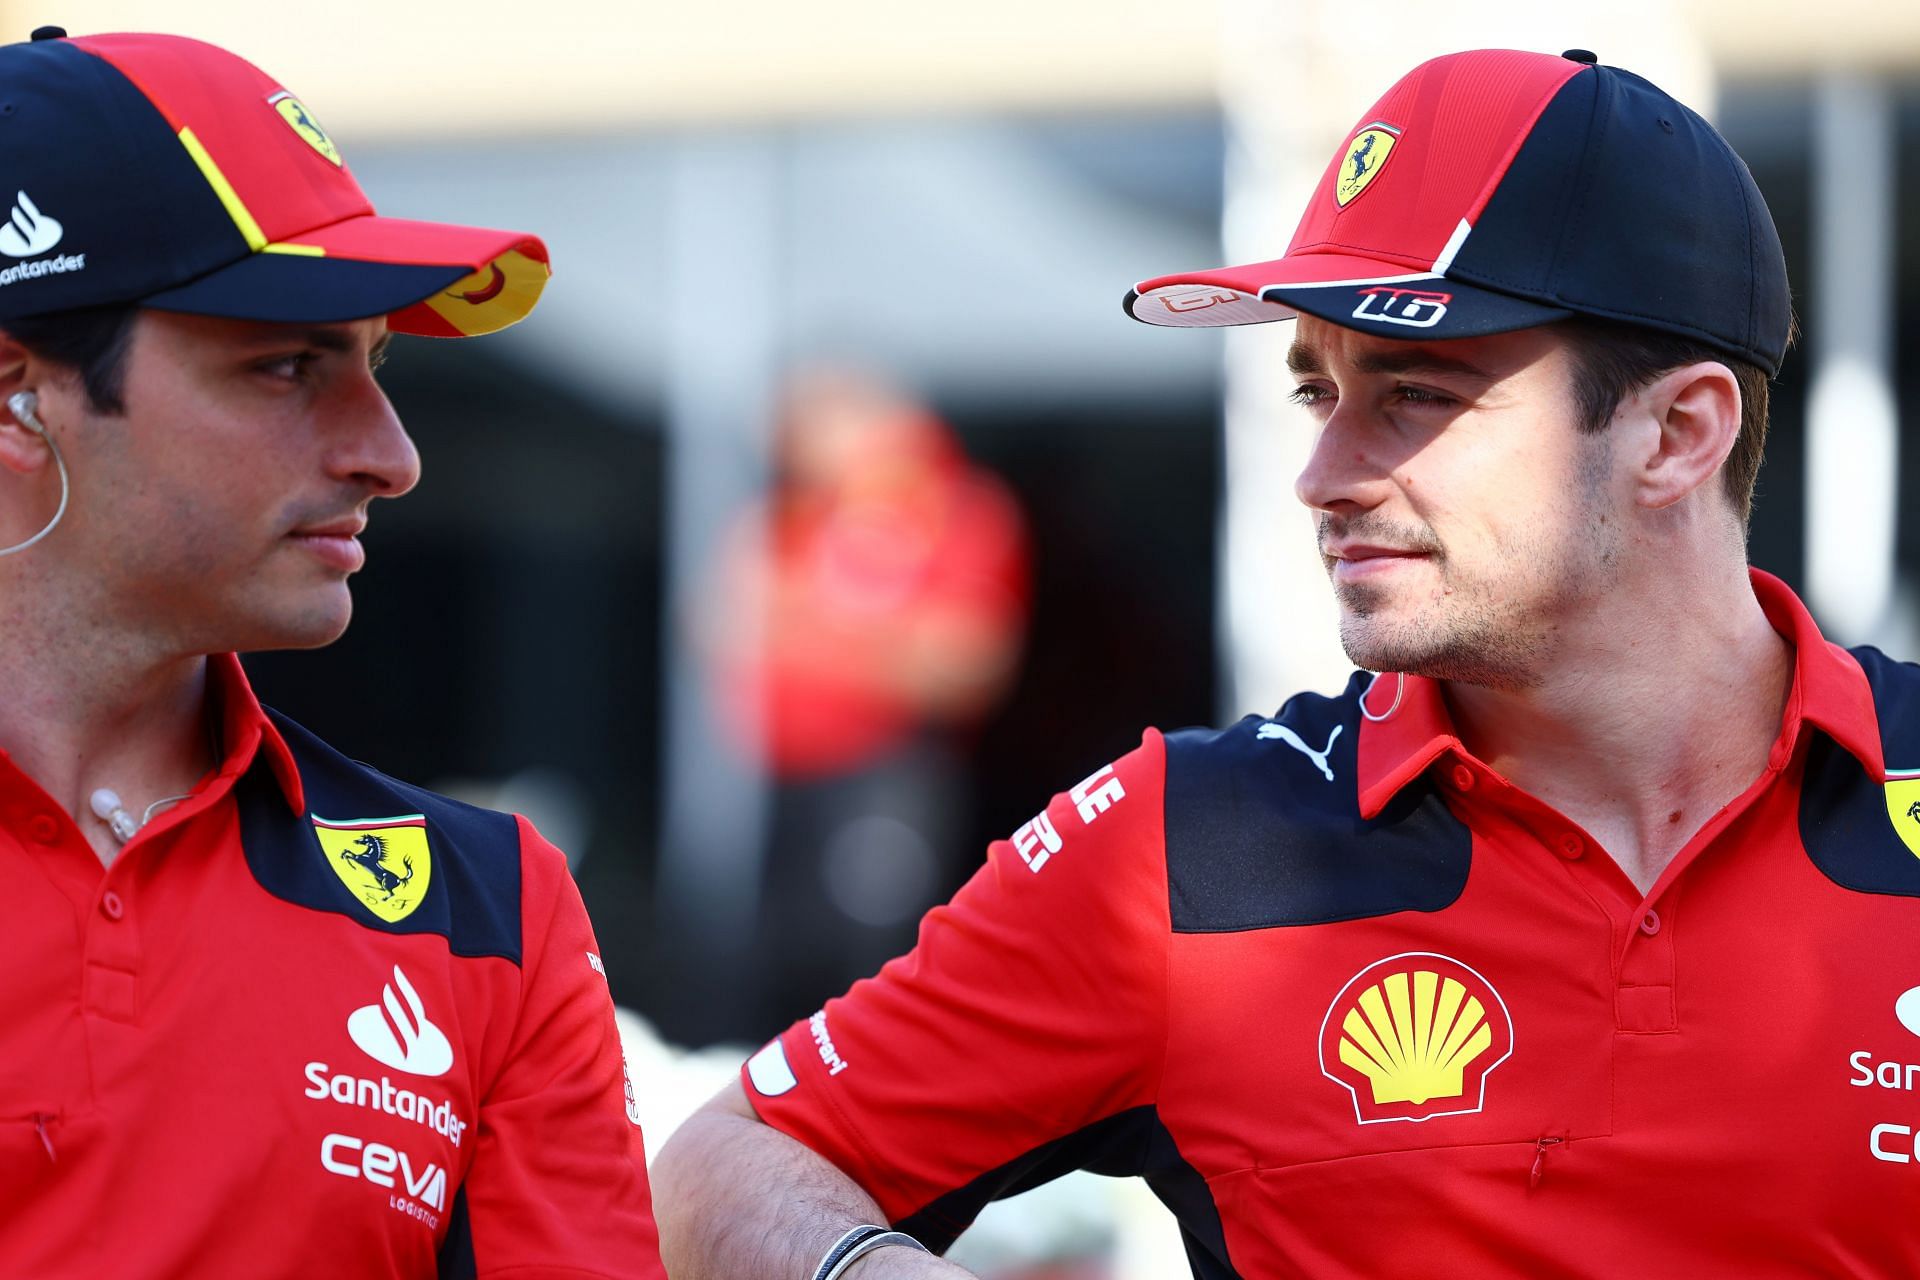 carlos-sainz-wants-to-race-with-ferrari-teammate-charles-leclerc-in-the-le-mans-24